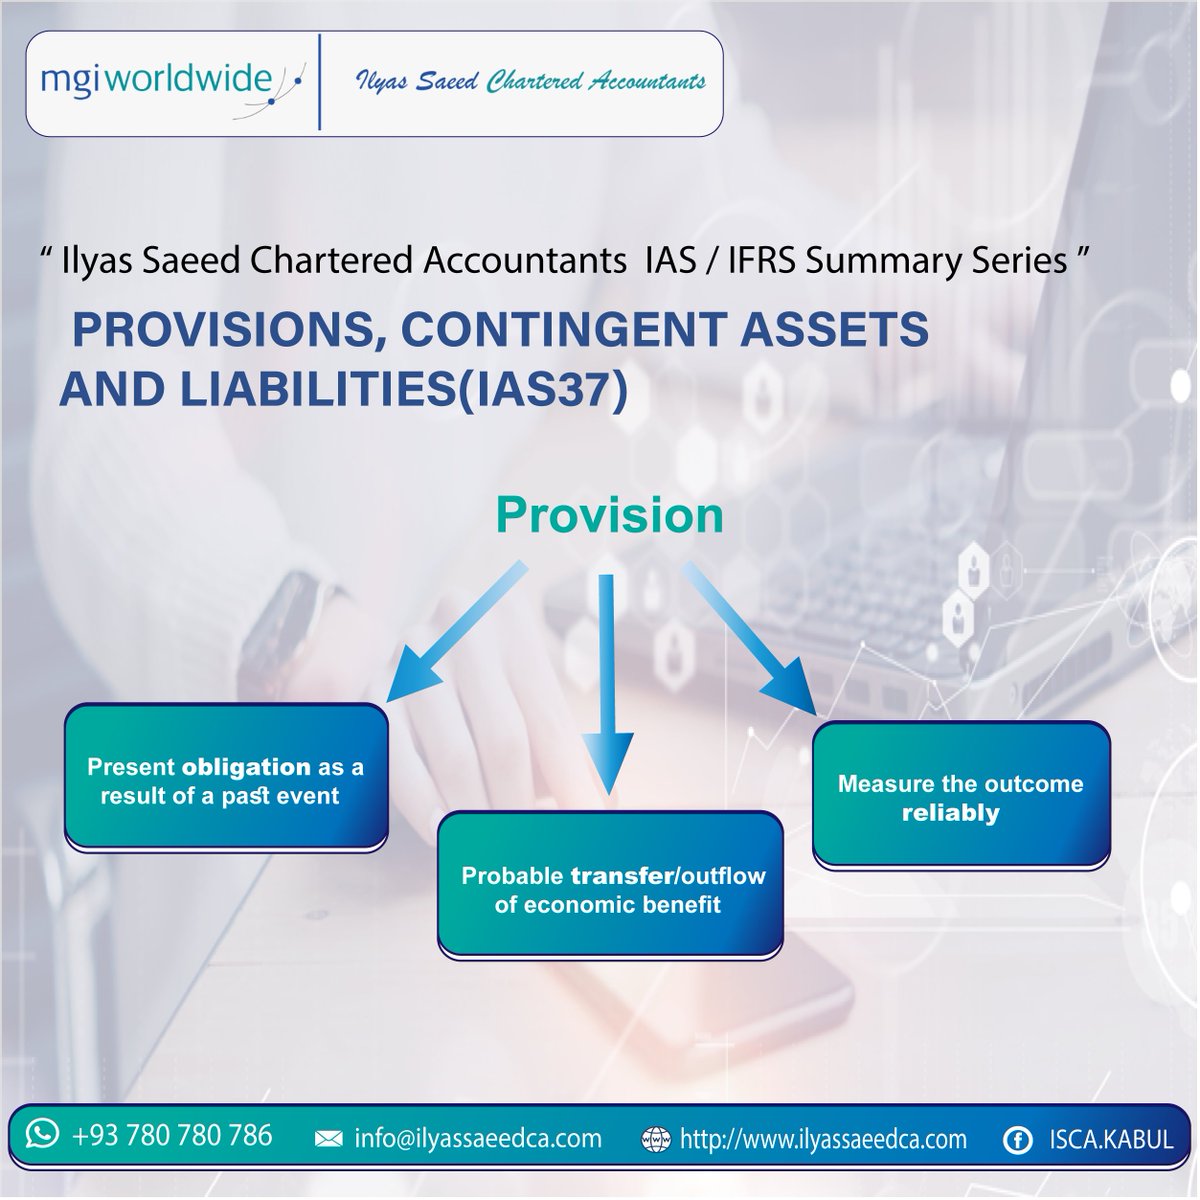 Ilyas Saeed Chartered Accountants IAS / IFRS Summary Series ”
PROVISIONS, CONTINGENT ASSETS
AND LIABILITIES(IAS37)

#IAS37
#IlyasSaeedCharteredAccountants